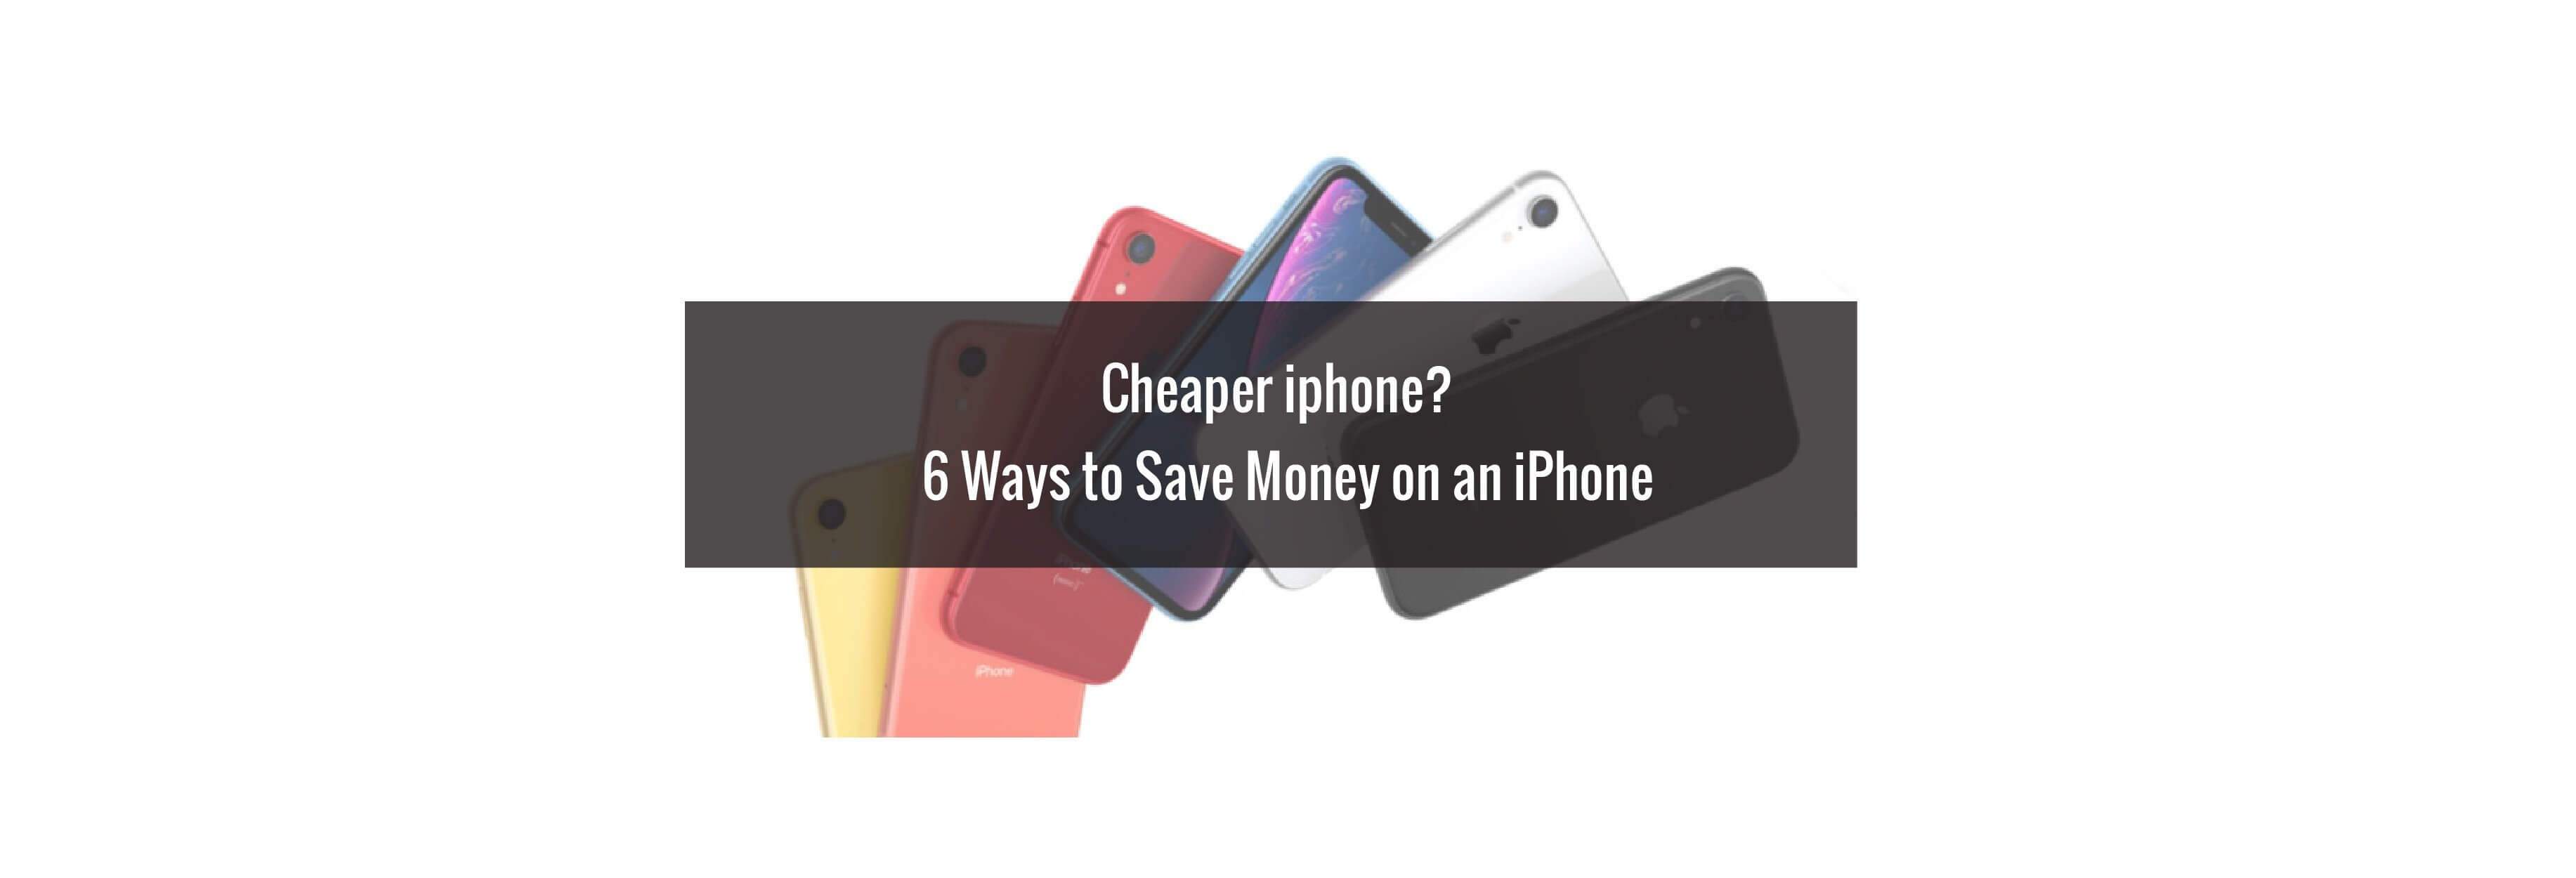 Cheaper iphone?   6 Ways to Save Money on an iPhone